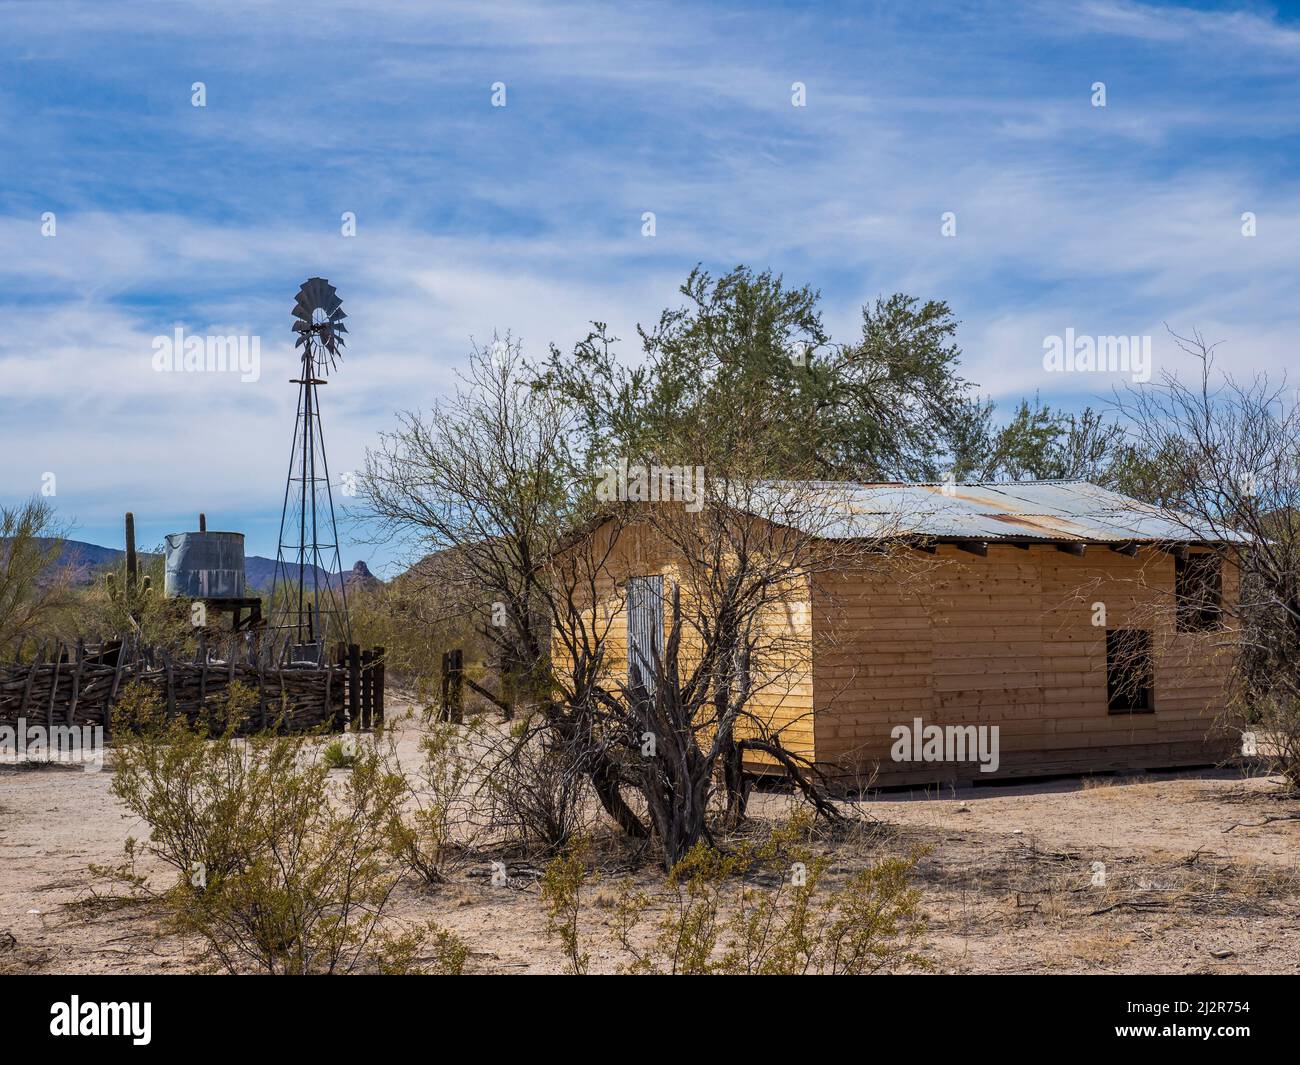 Reconstructed structure, Bates Well ranch, Organ Pipe Cactus National Monument, Arizona. Stock Photo